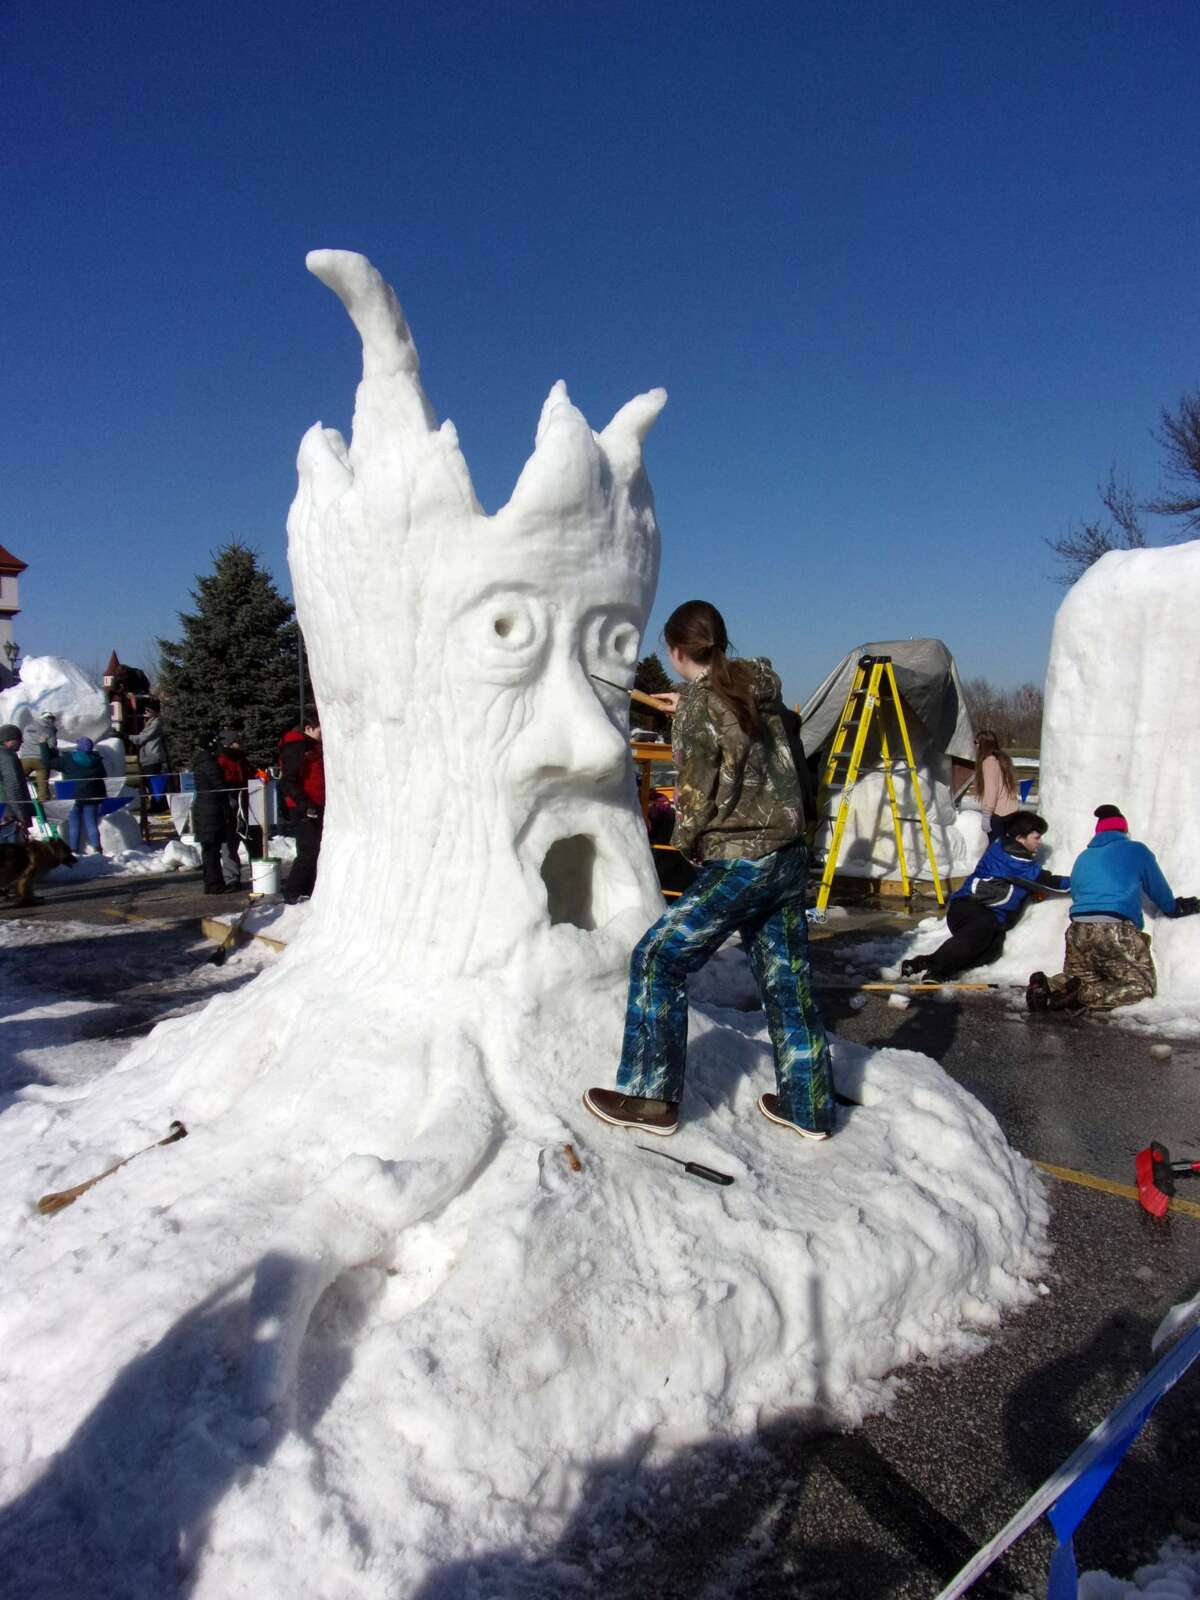 Crowds gathered to witness ice and snow sculptures being designed at last weekend's 2018 Zehnder's Snowfest.